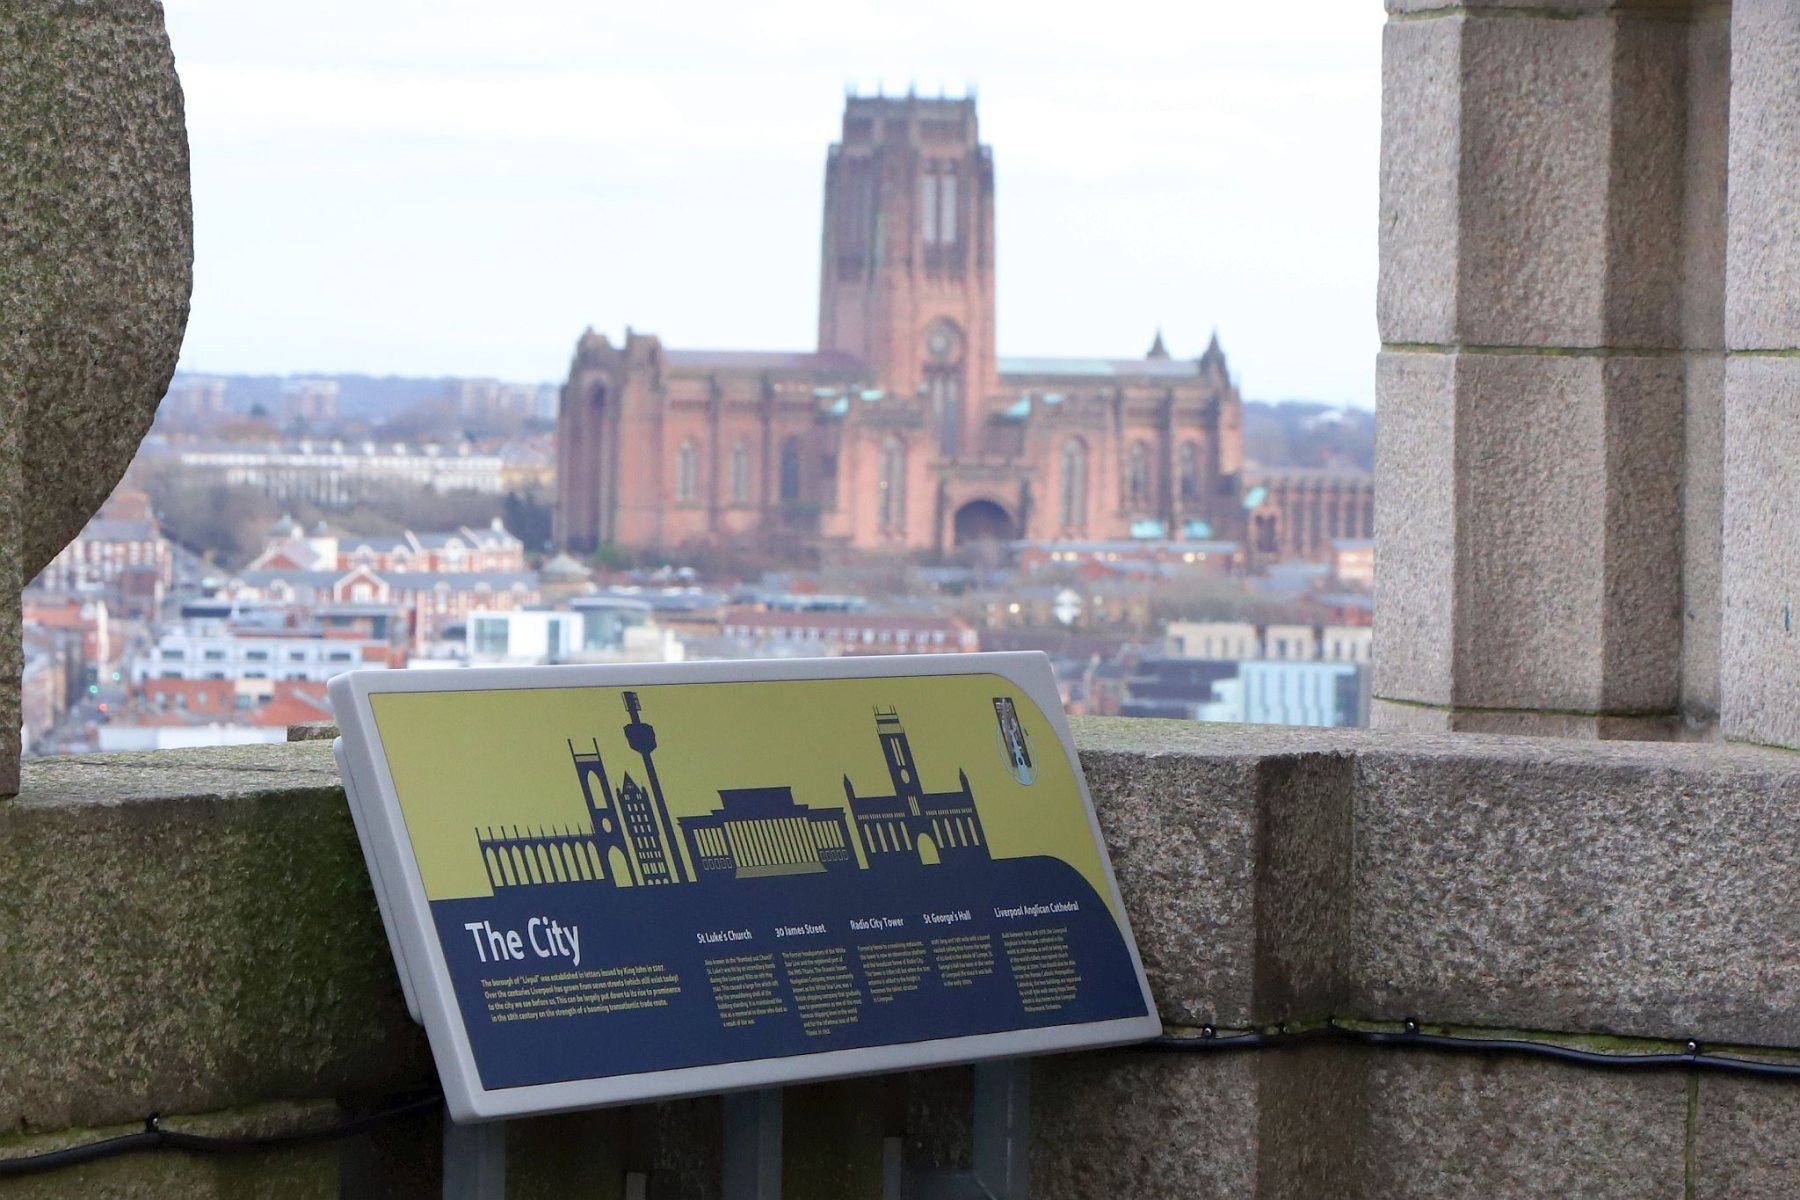 Royal Liver Building 360 Tower Tour looking across to Liverpool Cathedral with an information board in the foreground